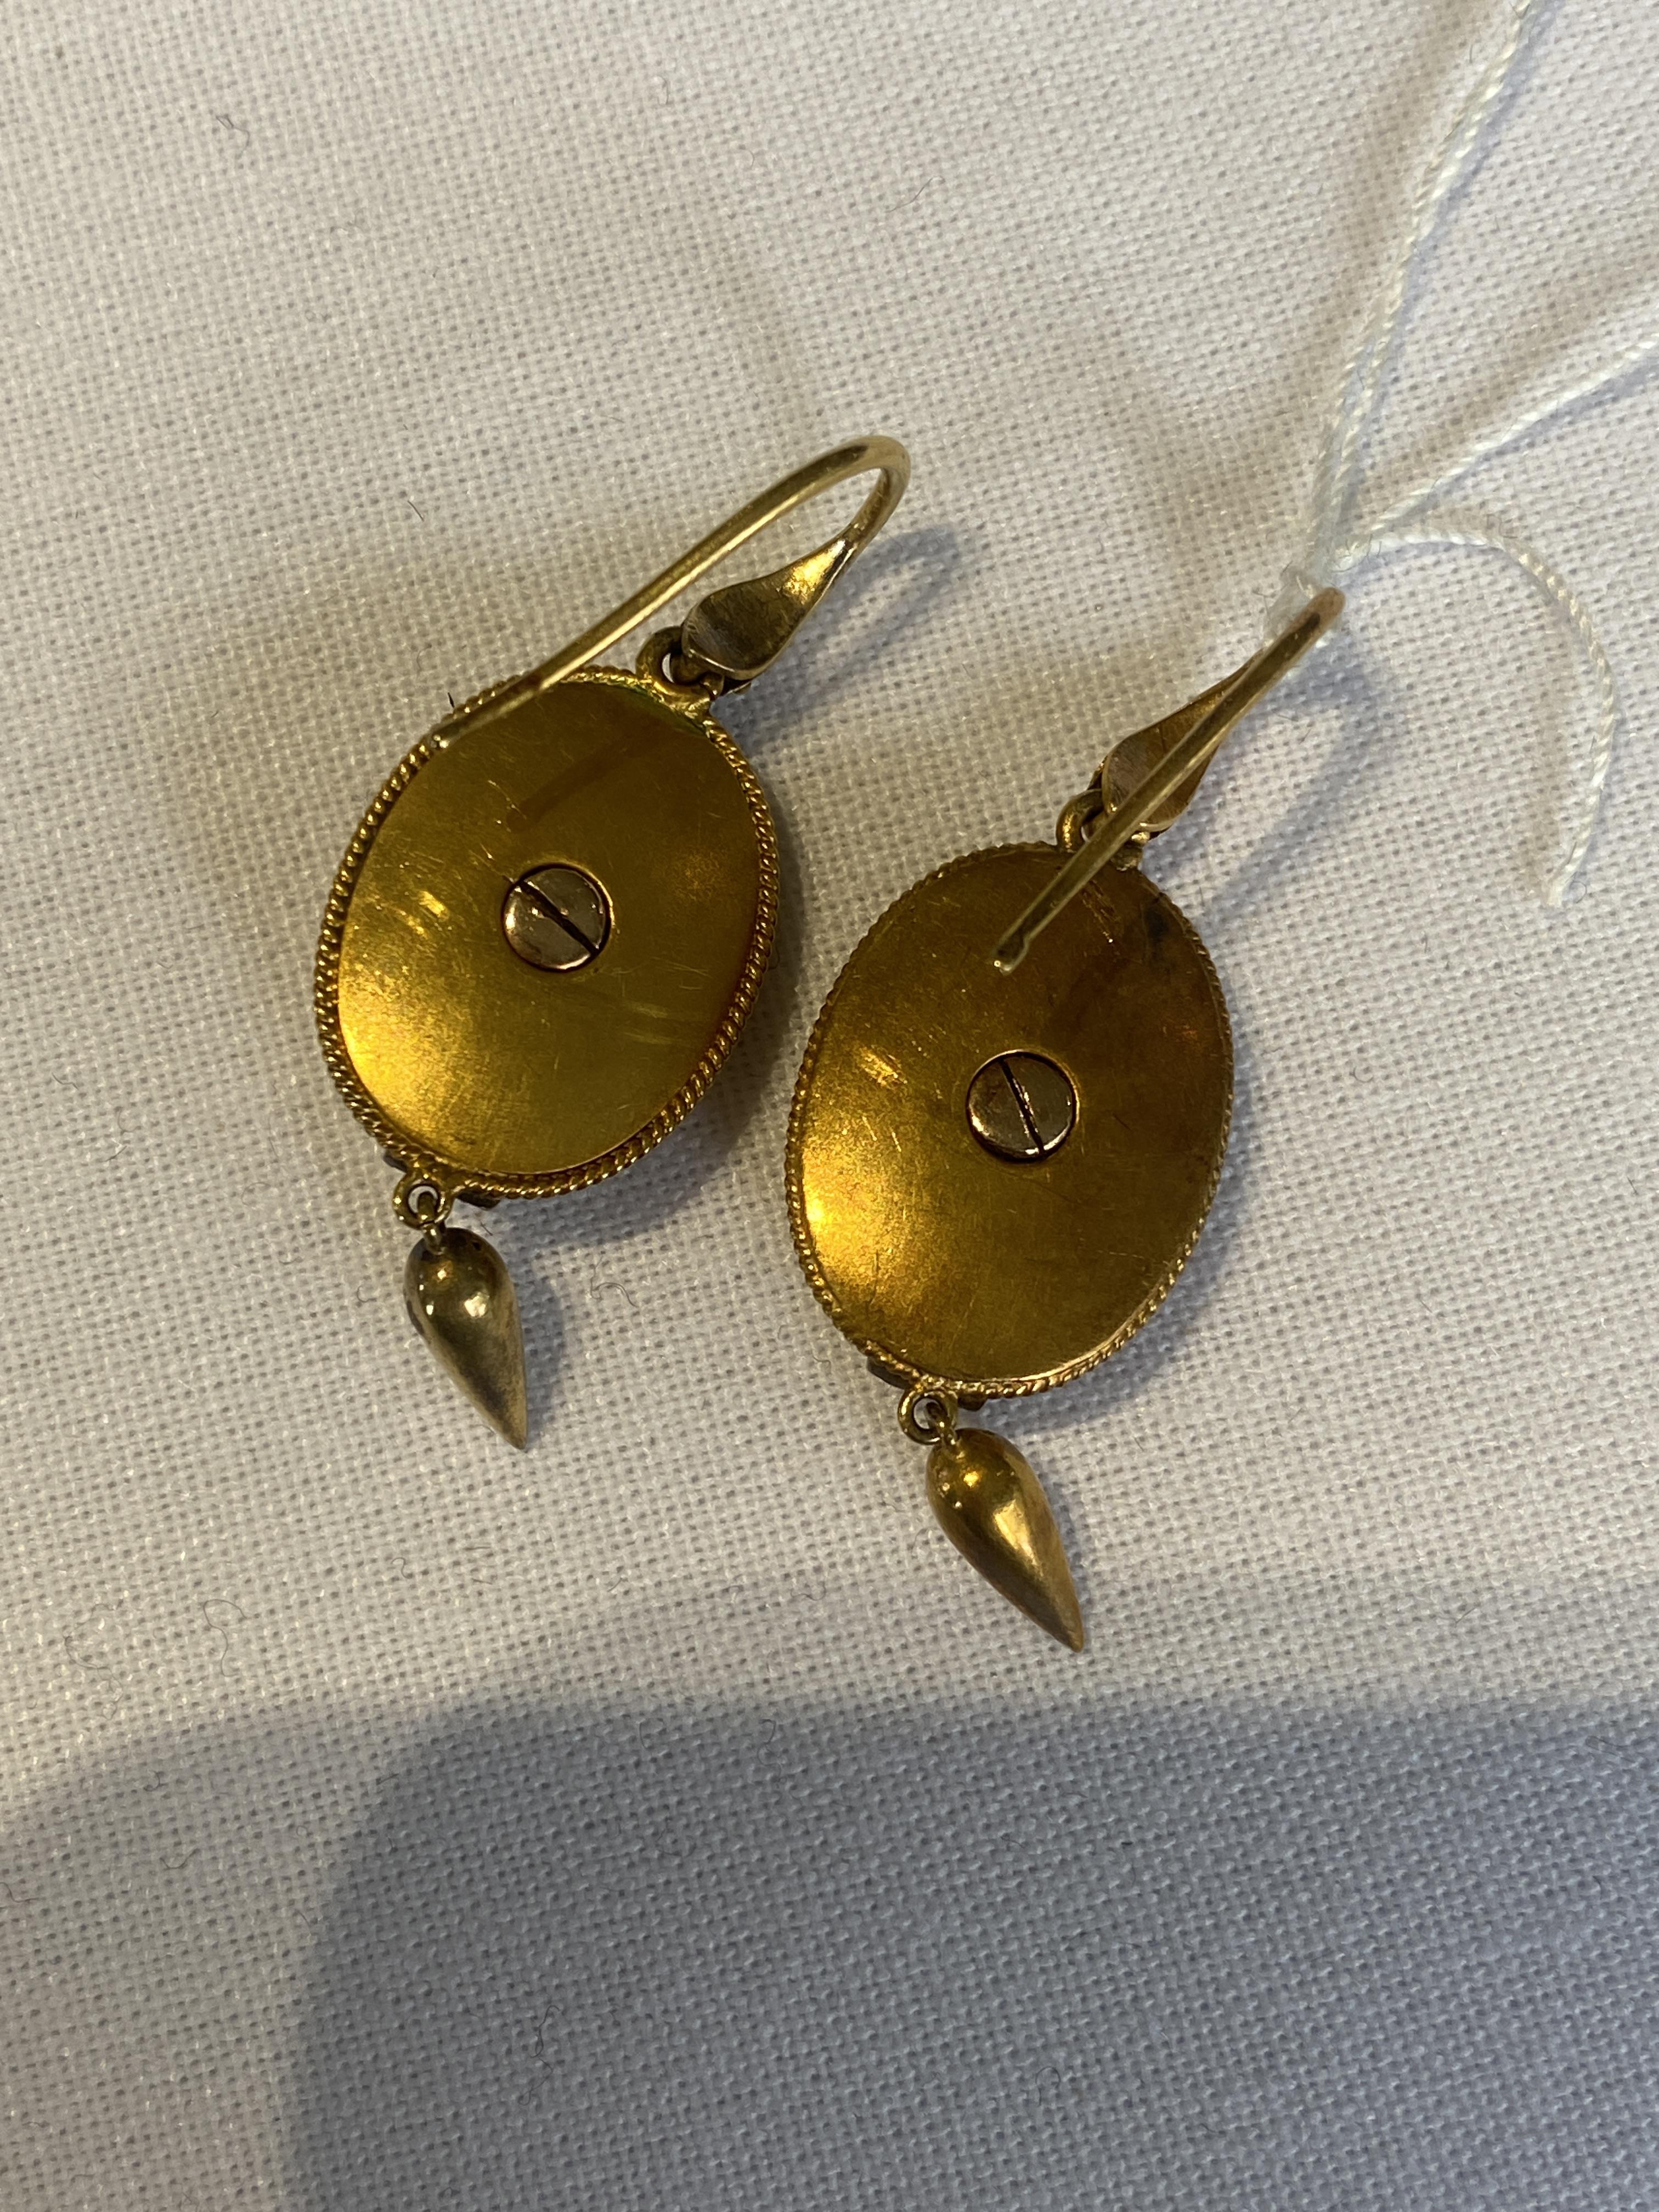 A pair of mid 19th century yellow gold and gem-set ear pendants - Image 2 of 3